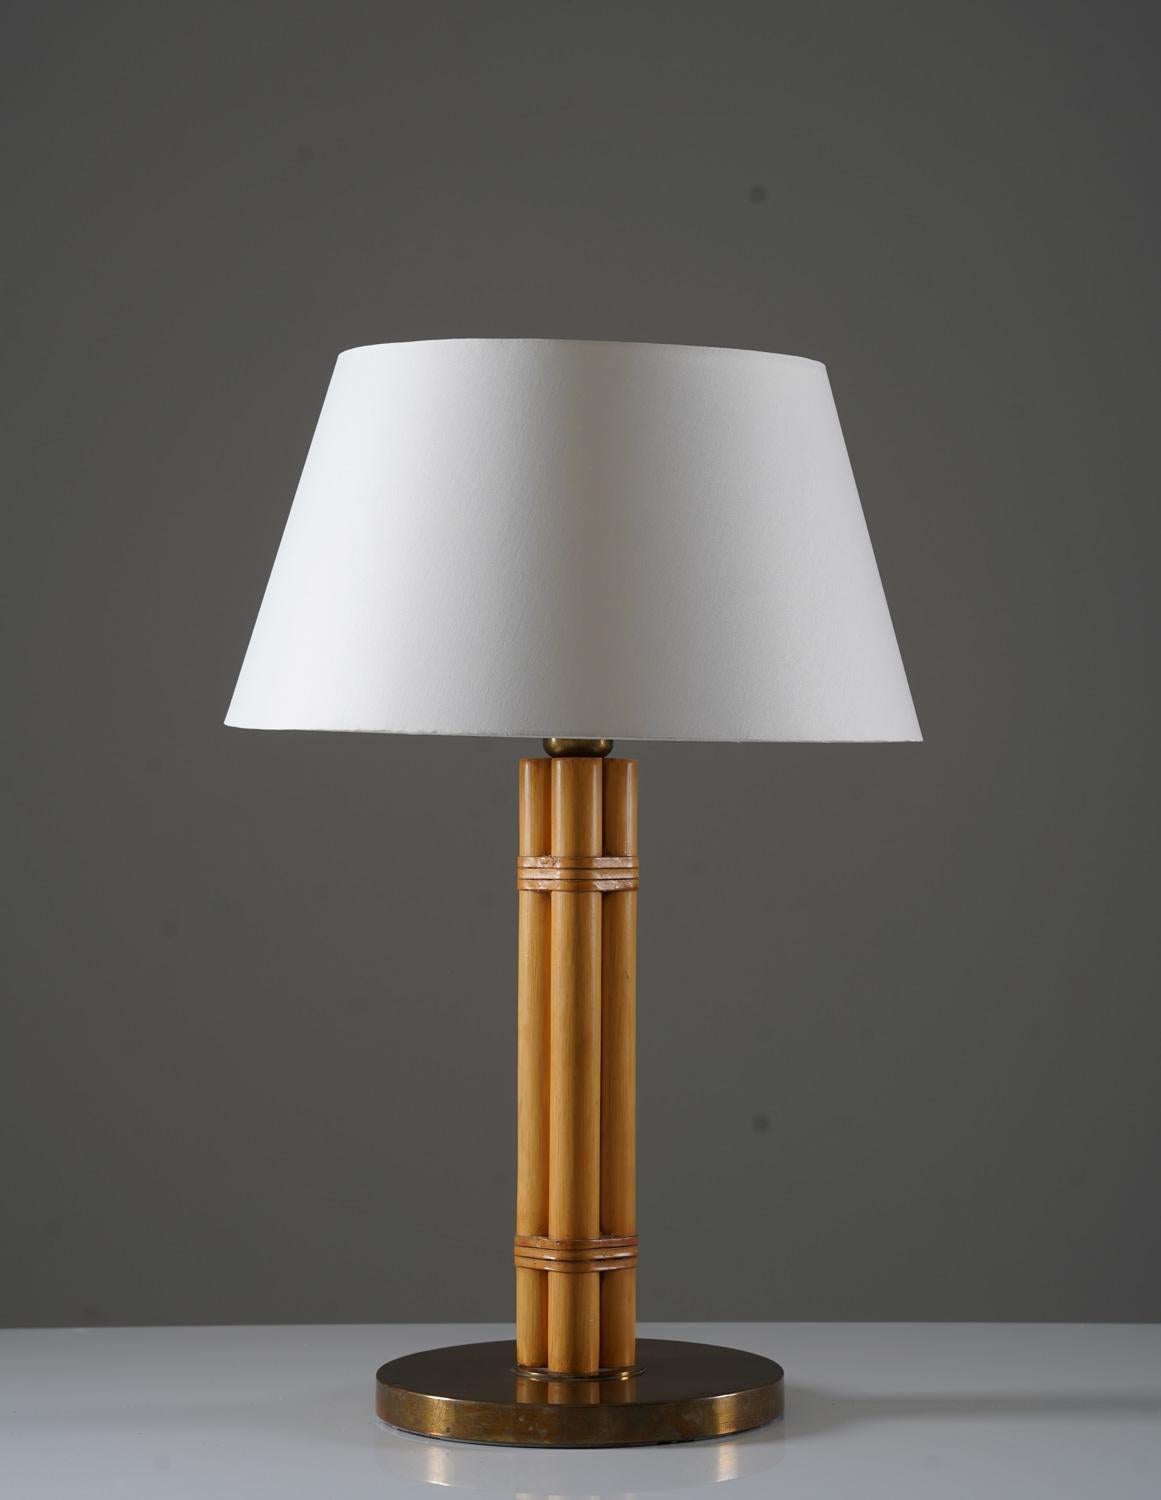 Scandinavian midcentury table lamp in brass and bamboo by Bergboms, Sweden, 1960s.
This lamp is made of bamboo with details in brass and leather. The lamp comes with a new high-quality shade in off-white satin fabric.

Condition: Very good